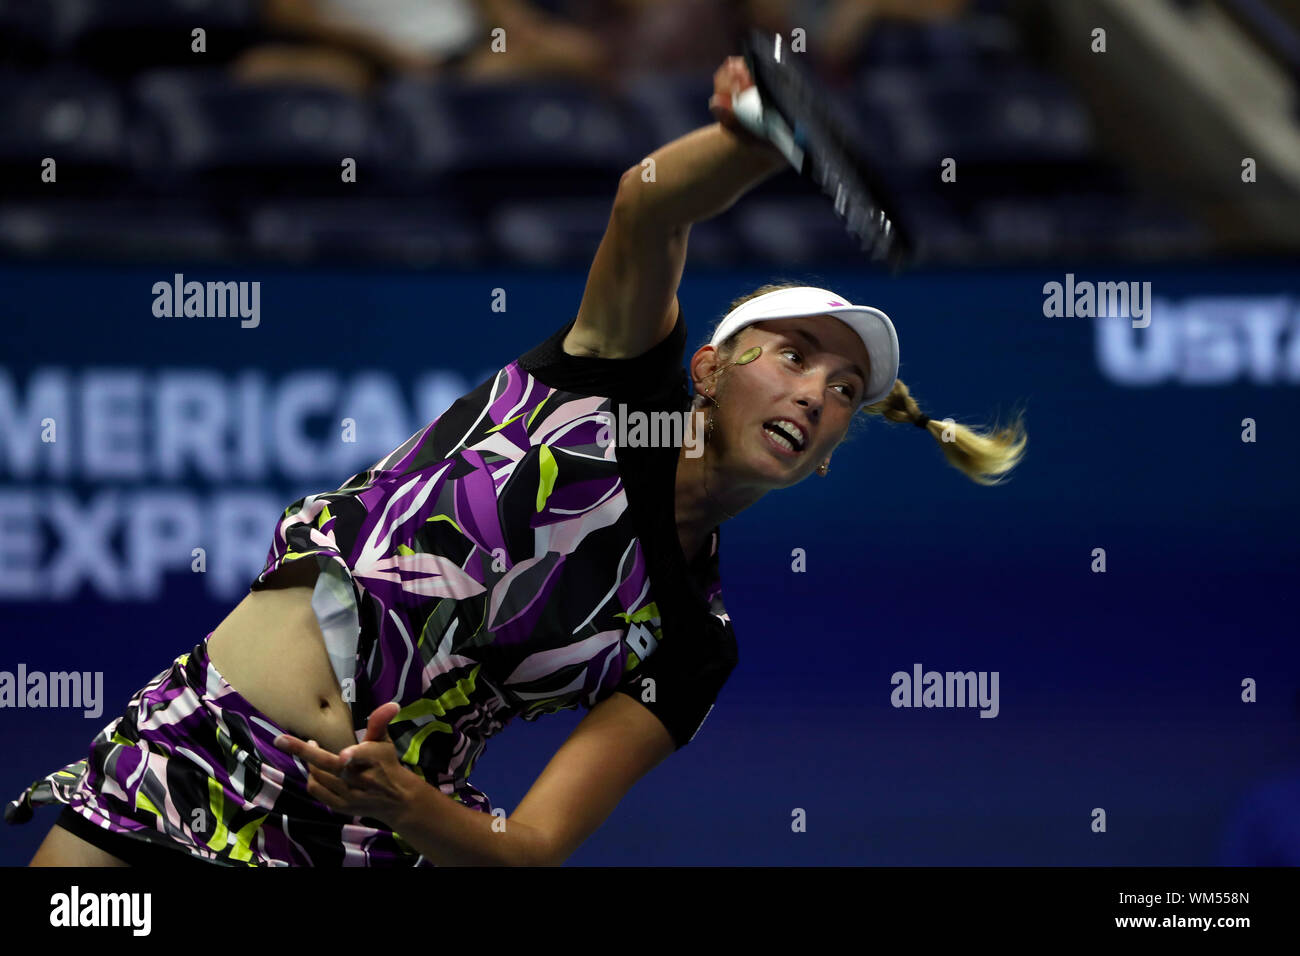 Flushing Meadows, New York, United States - September 4, 2019. Elise Martens of Belgium serving to Bianca Andreescu of Canada during their quarterfinal match at the US Open today.   Andreescu won in three sets to advance to the semi finals. Credit: Adam Stoltman/Alamy Live News Stock Photo